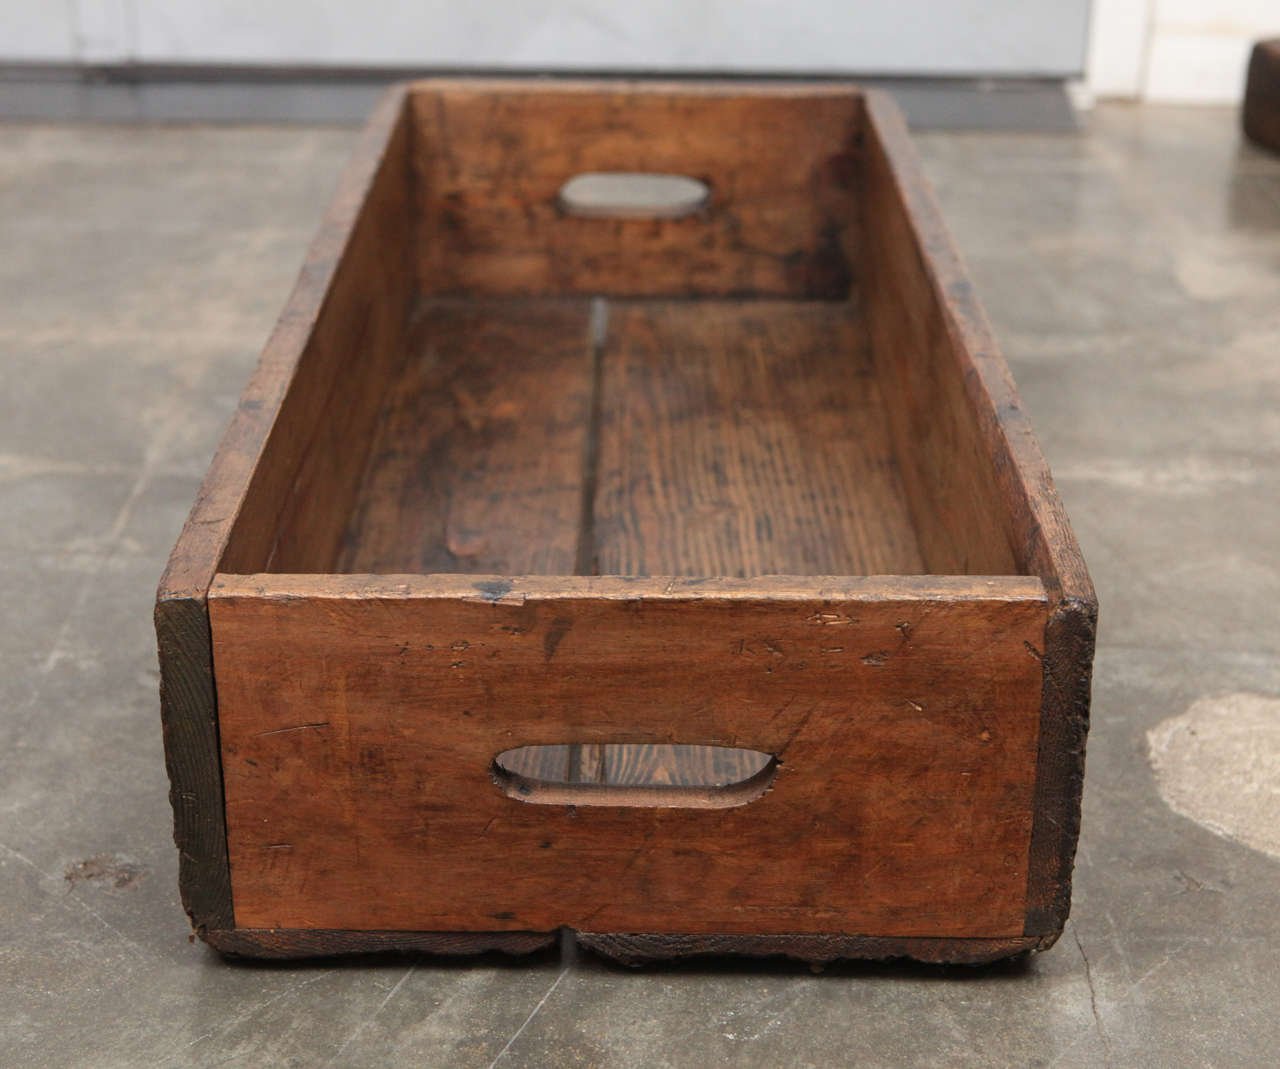 20th Century American Industrial Factory Wooden Trays